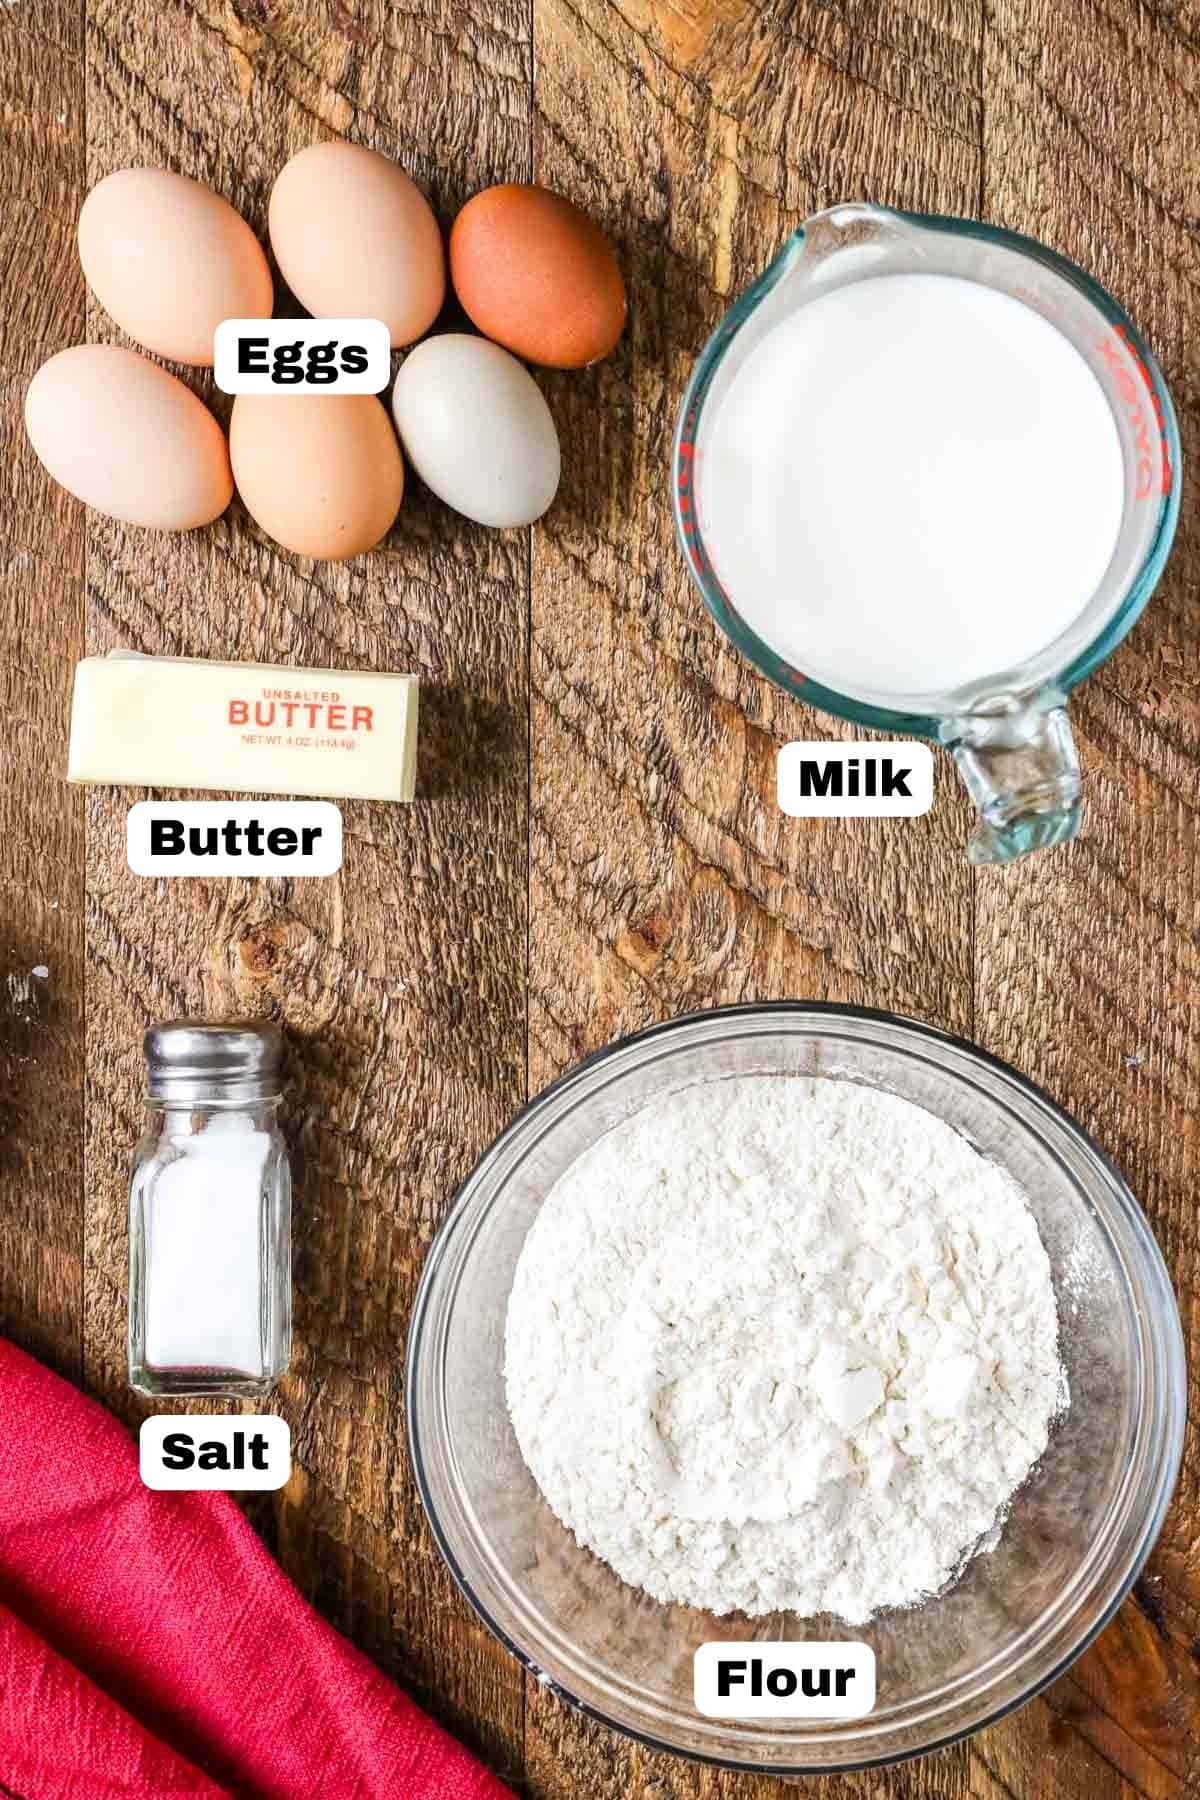 Overhead view of labelled ingredients including eggs, milk, flour, butter, and salt.